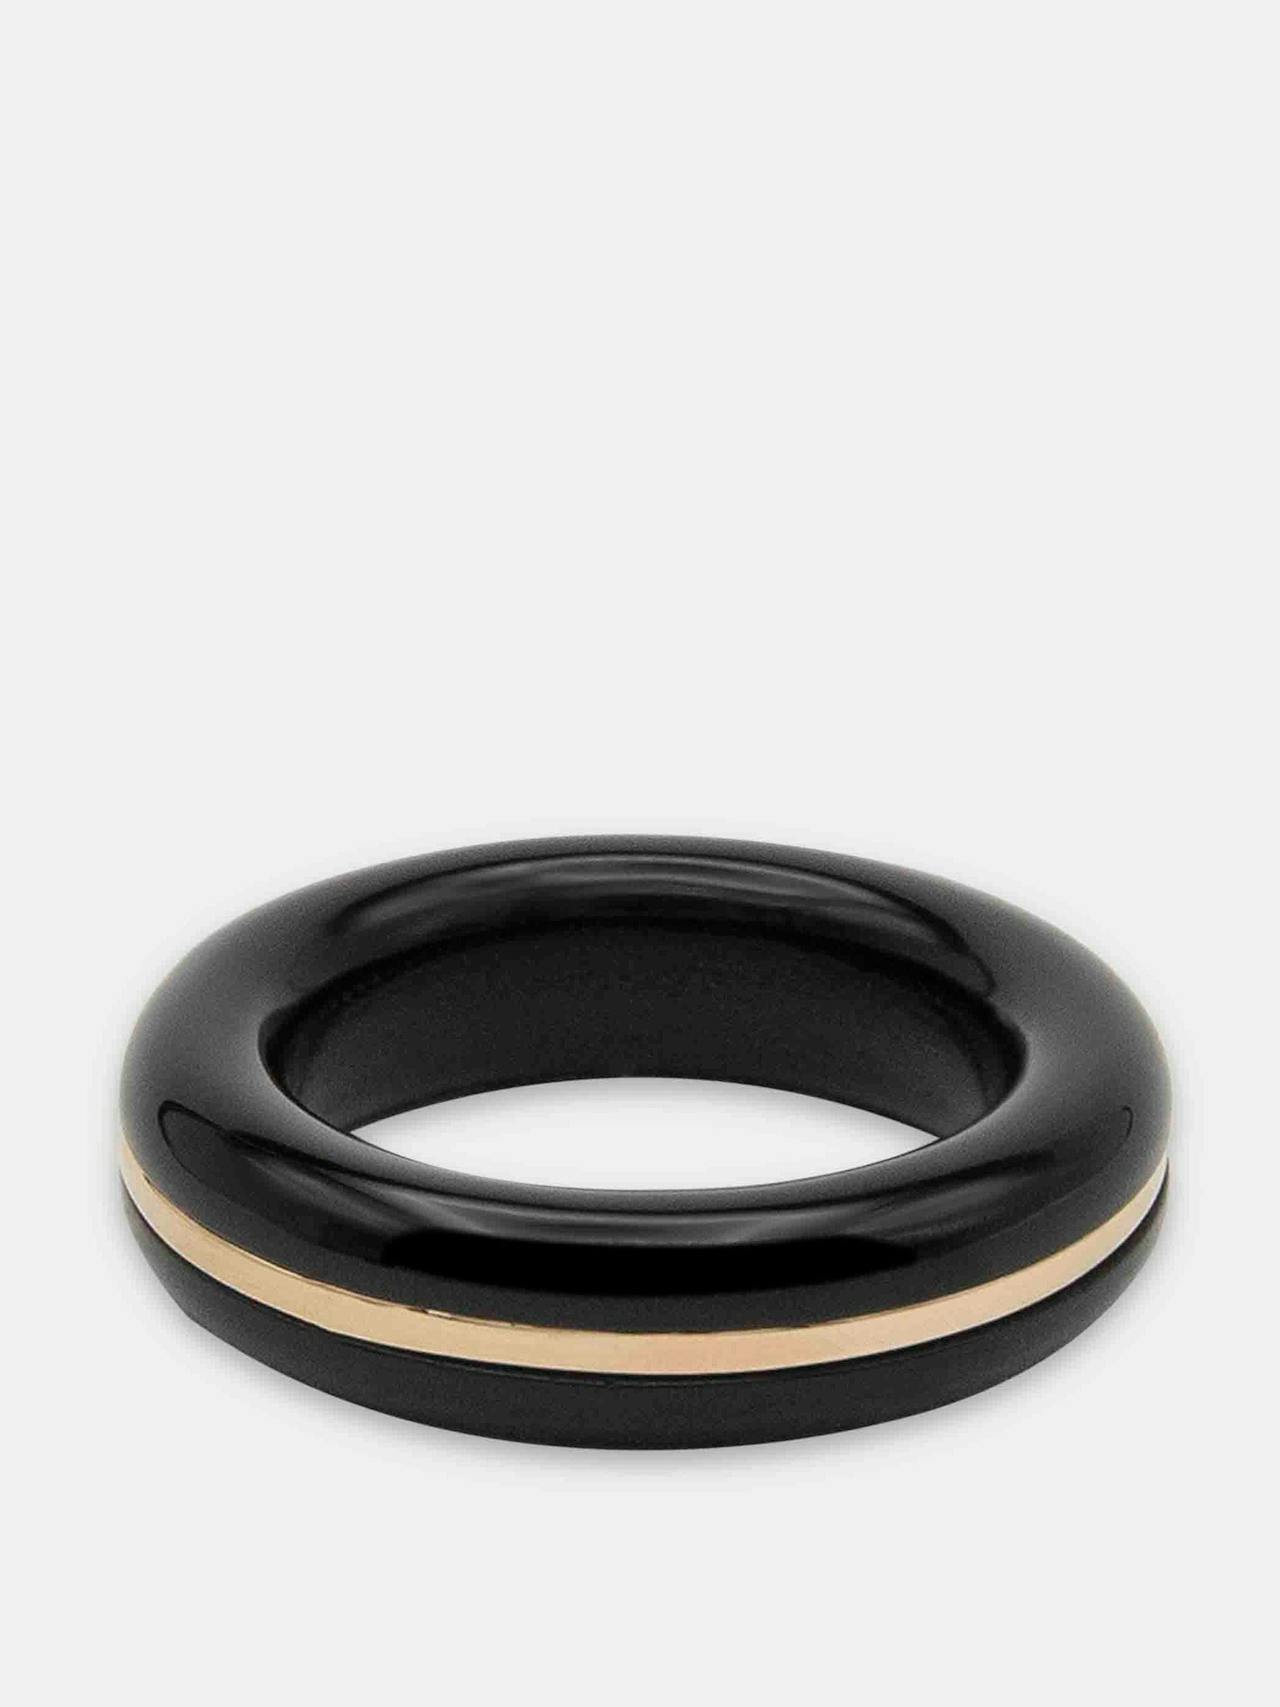 Black onyx essential stacking ring